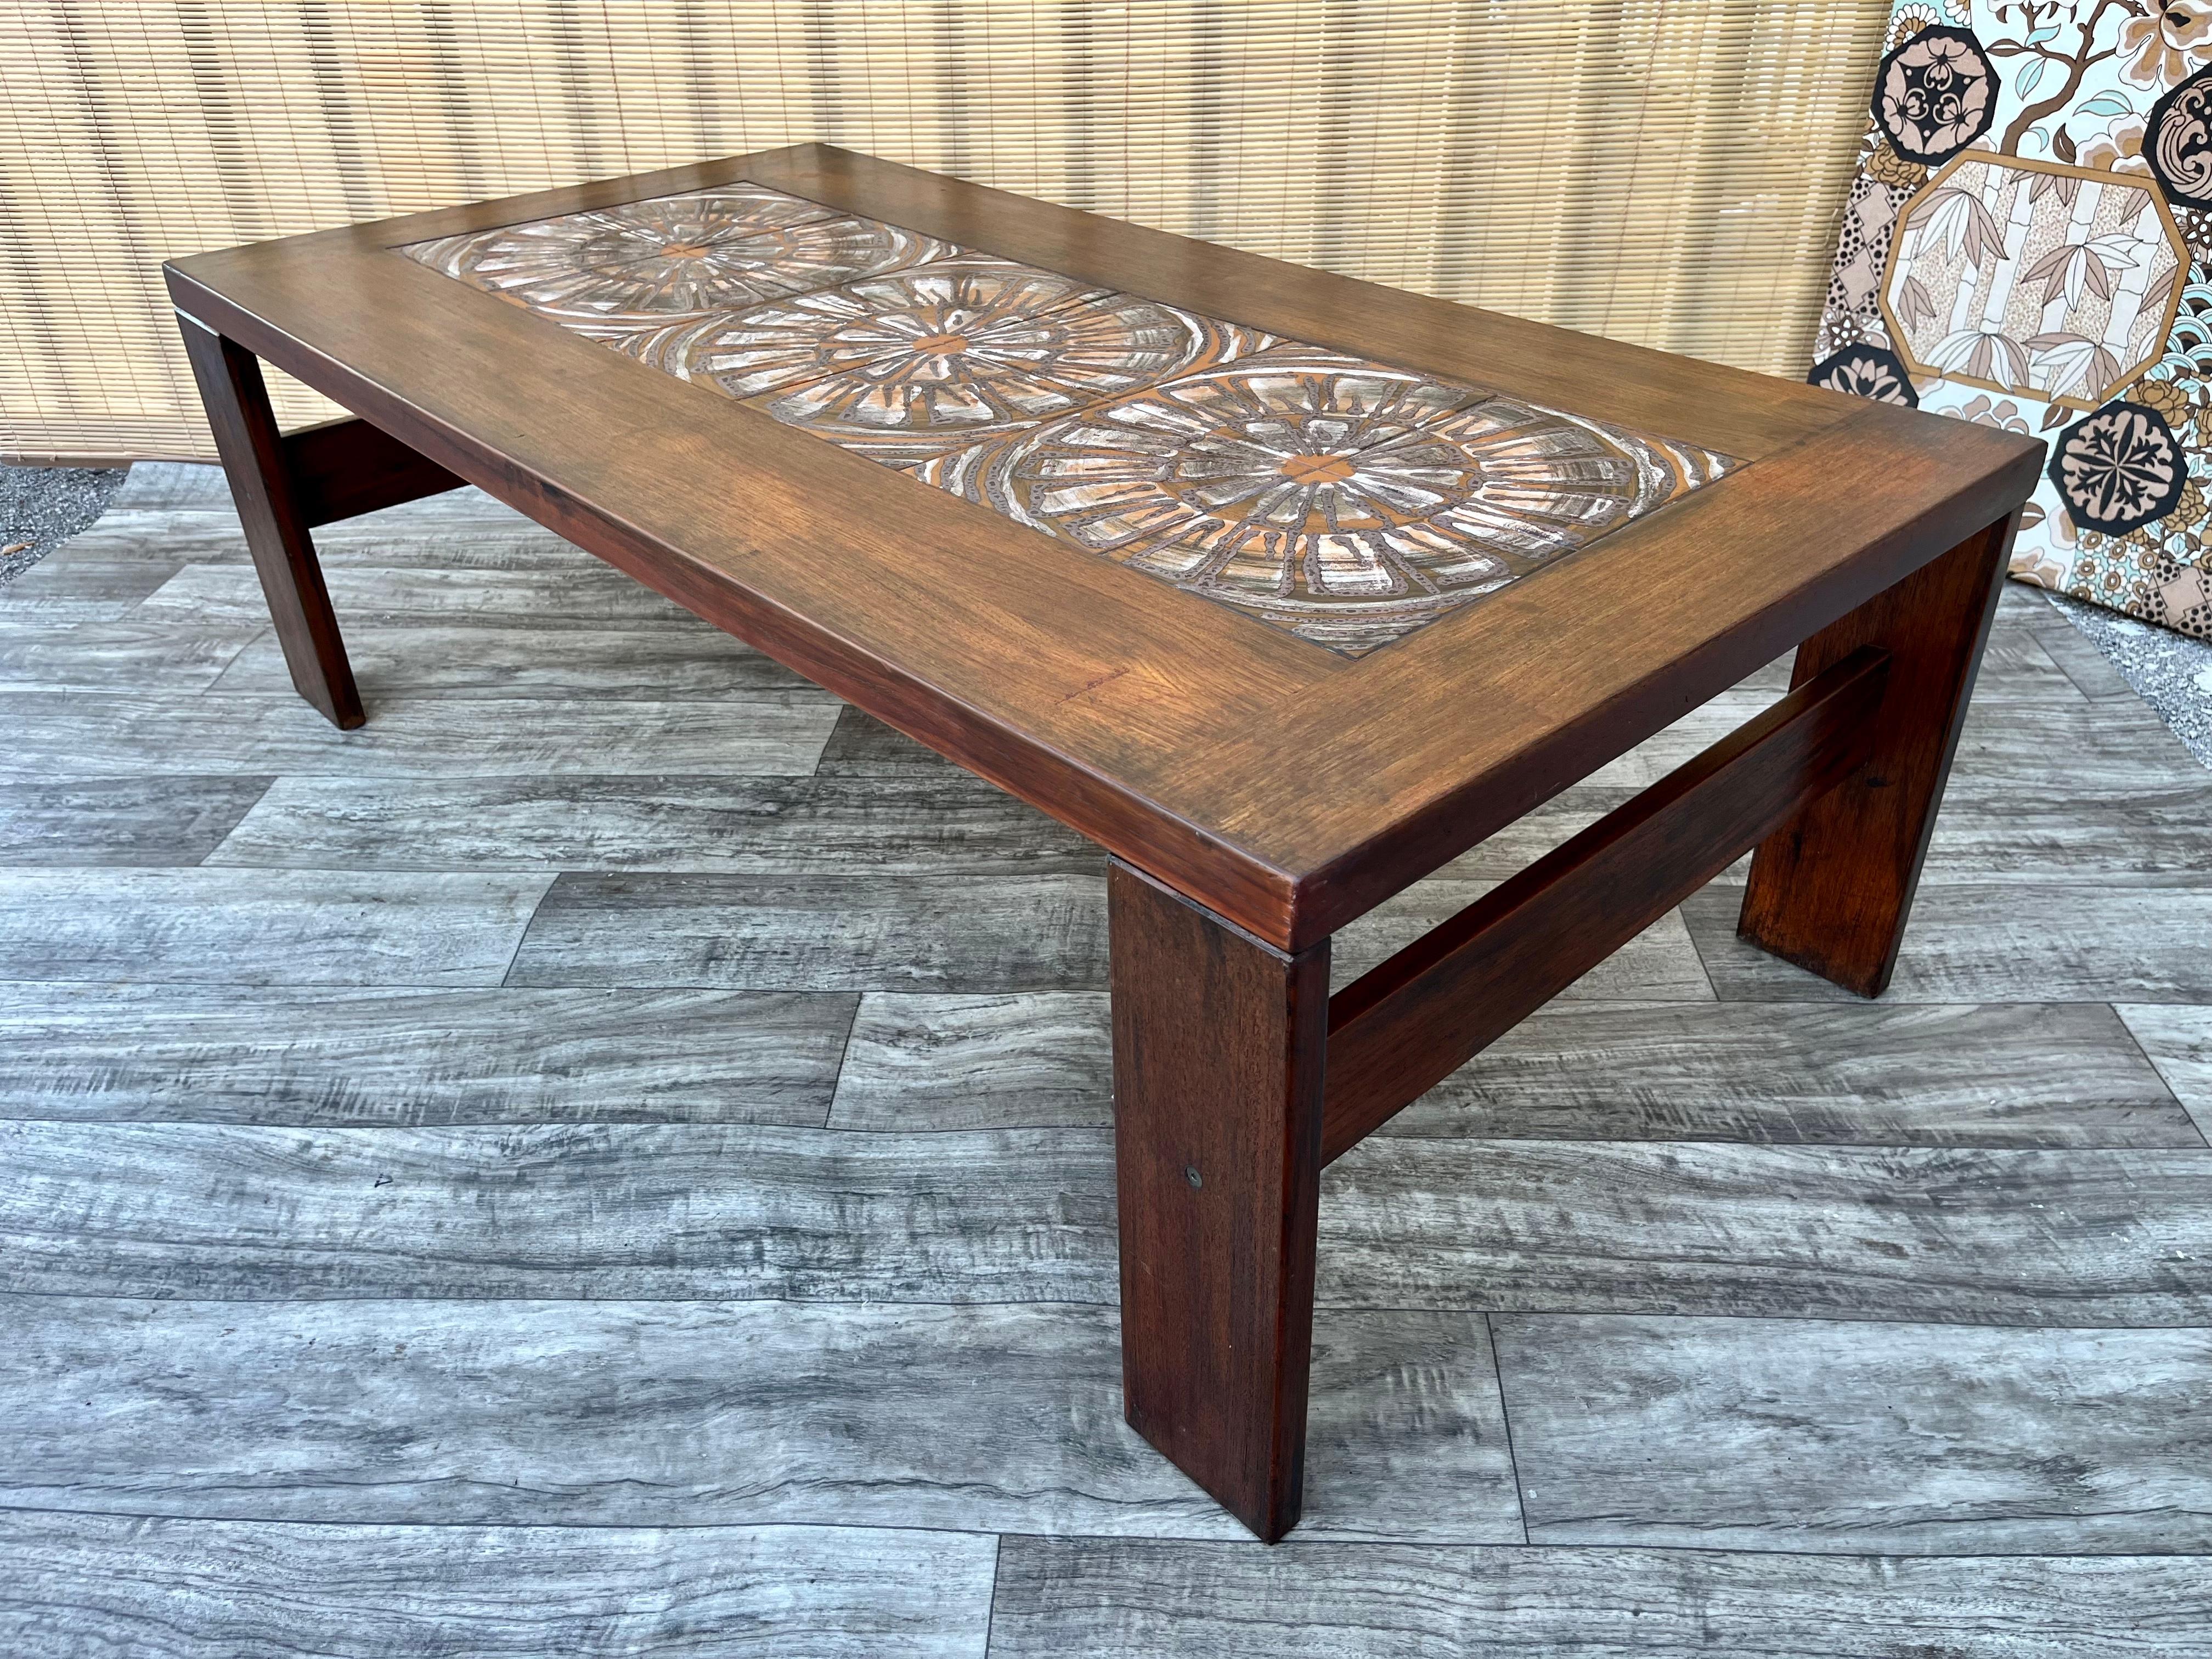 Danish Mid Century Modern Coffee Table With Ceramic Tile Inlays. Circa 1960s  For Sale 5